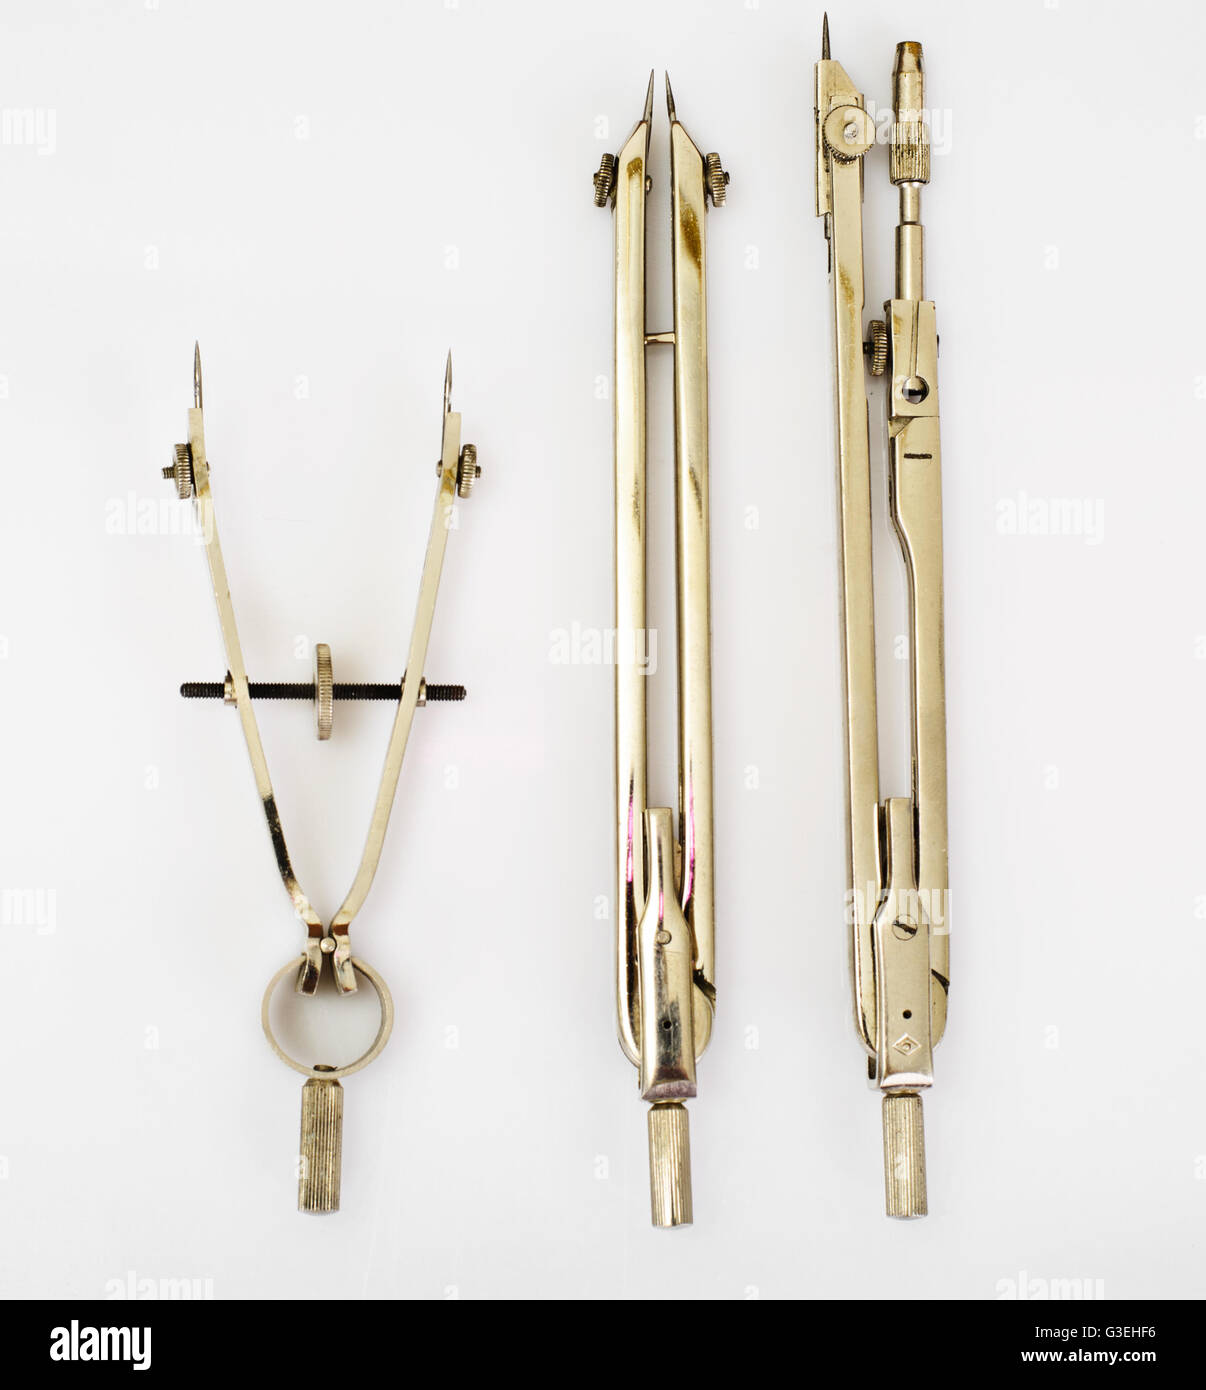 Pair of Compasses and Other Drawing Instruments Stock Photo